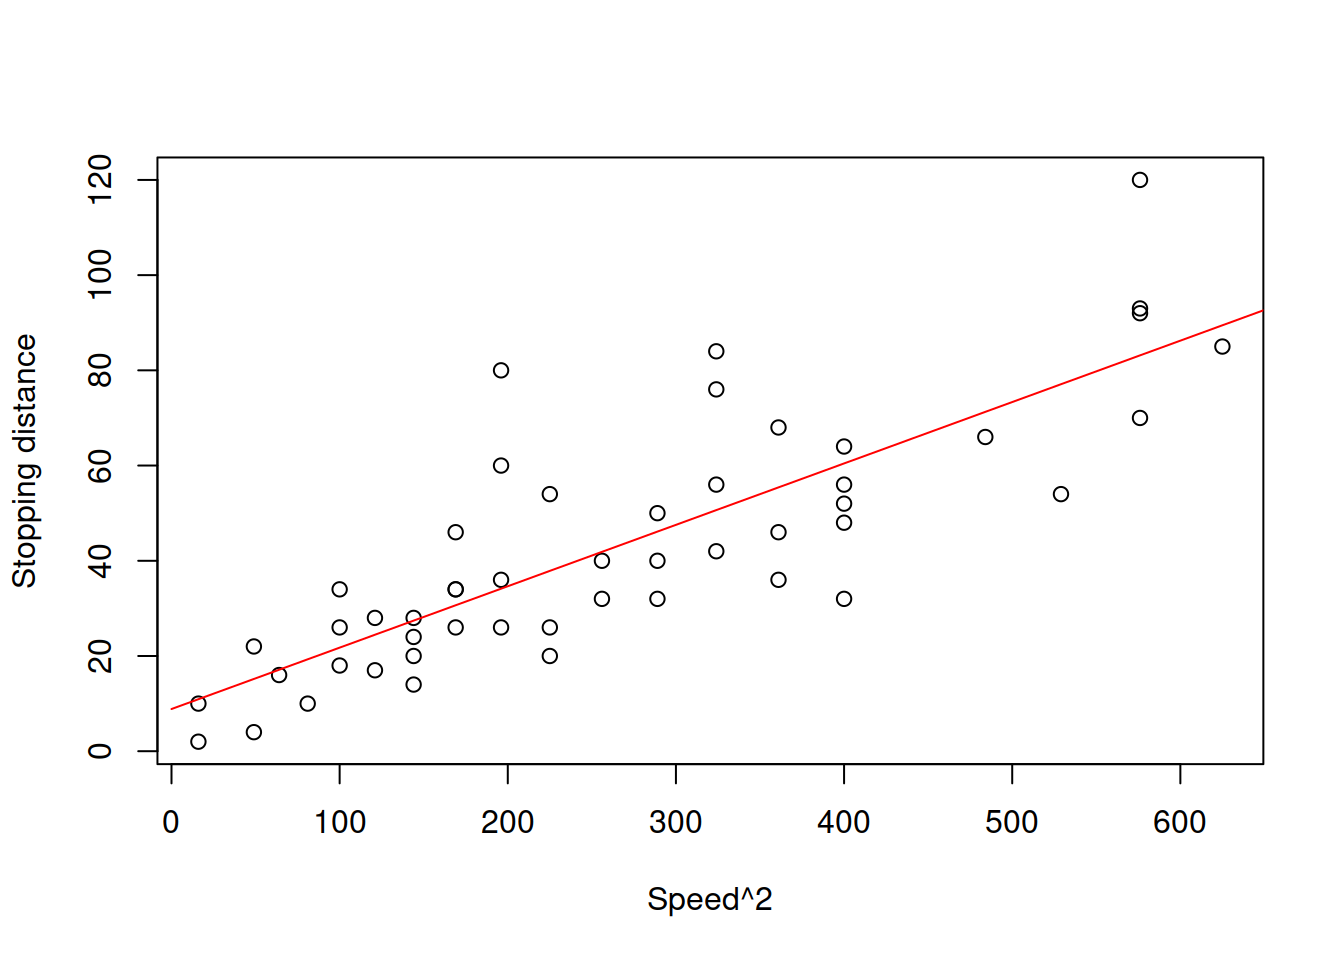 Speed squared vs stopping distance.